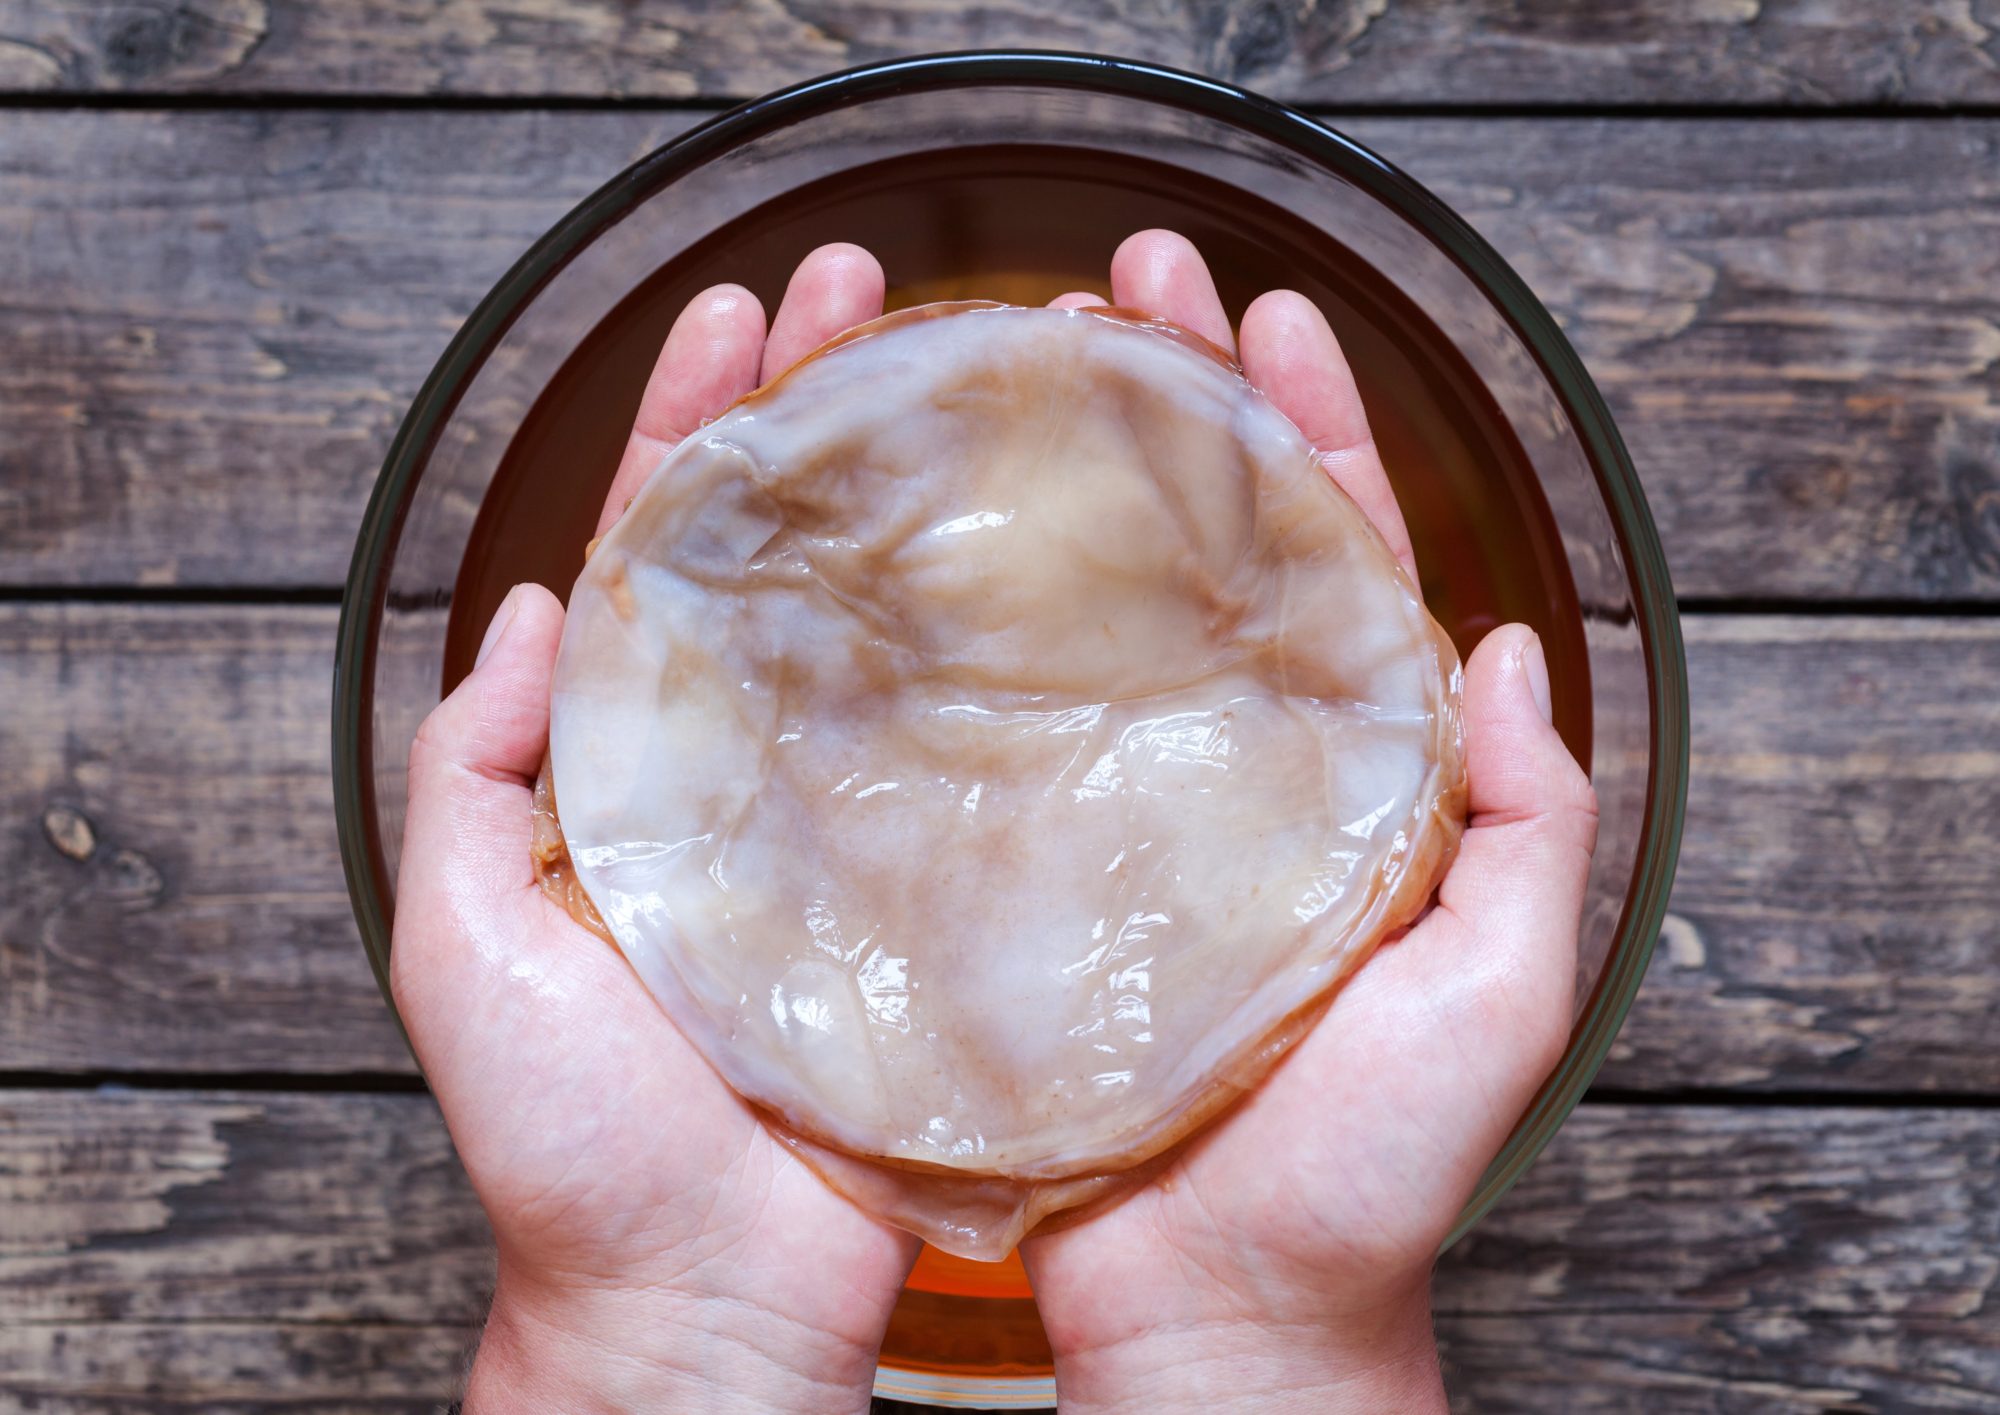 Kombucha SCOBY - What to Do with SCOBYs After Brewing - Bucha Brewers